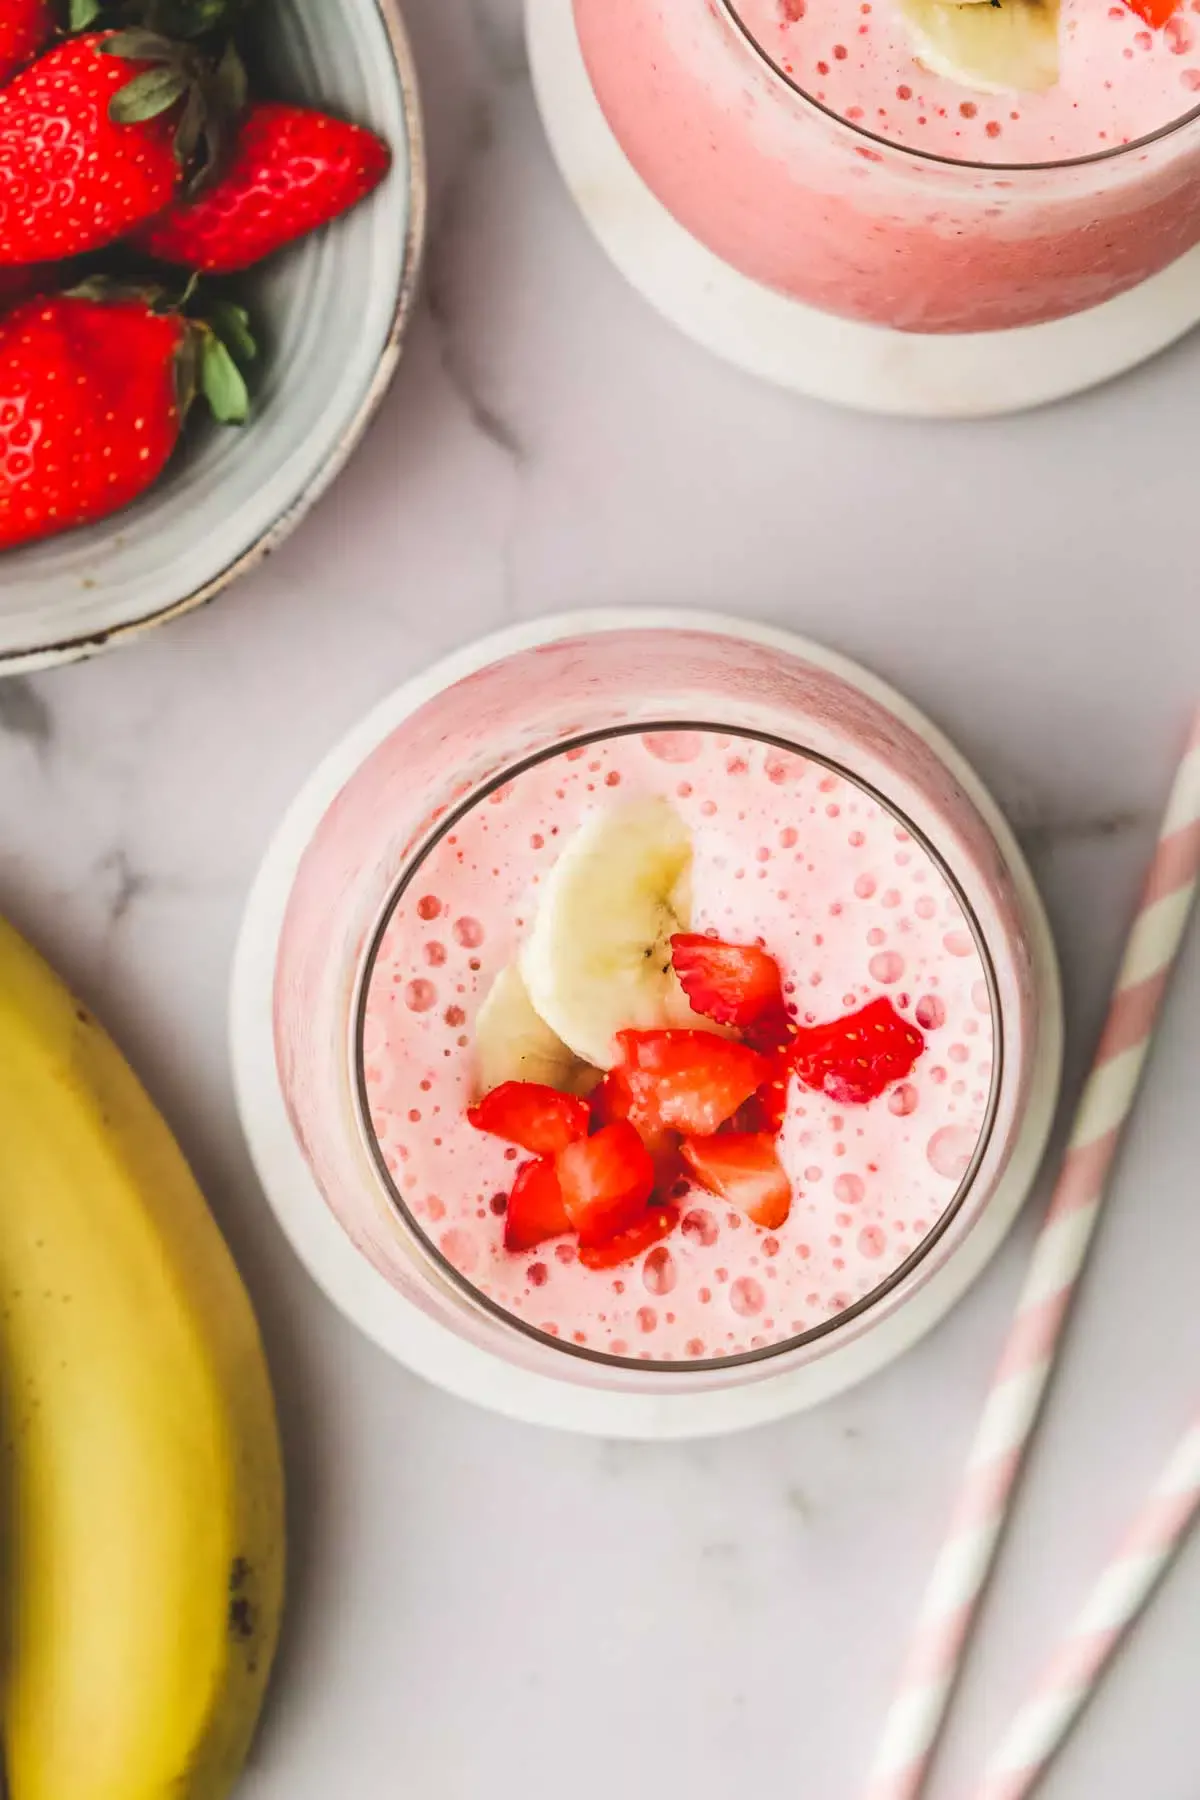 A glass of smoothie with banana pieces and strawberries